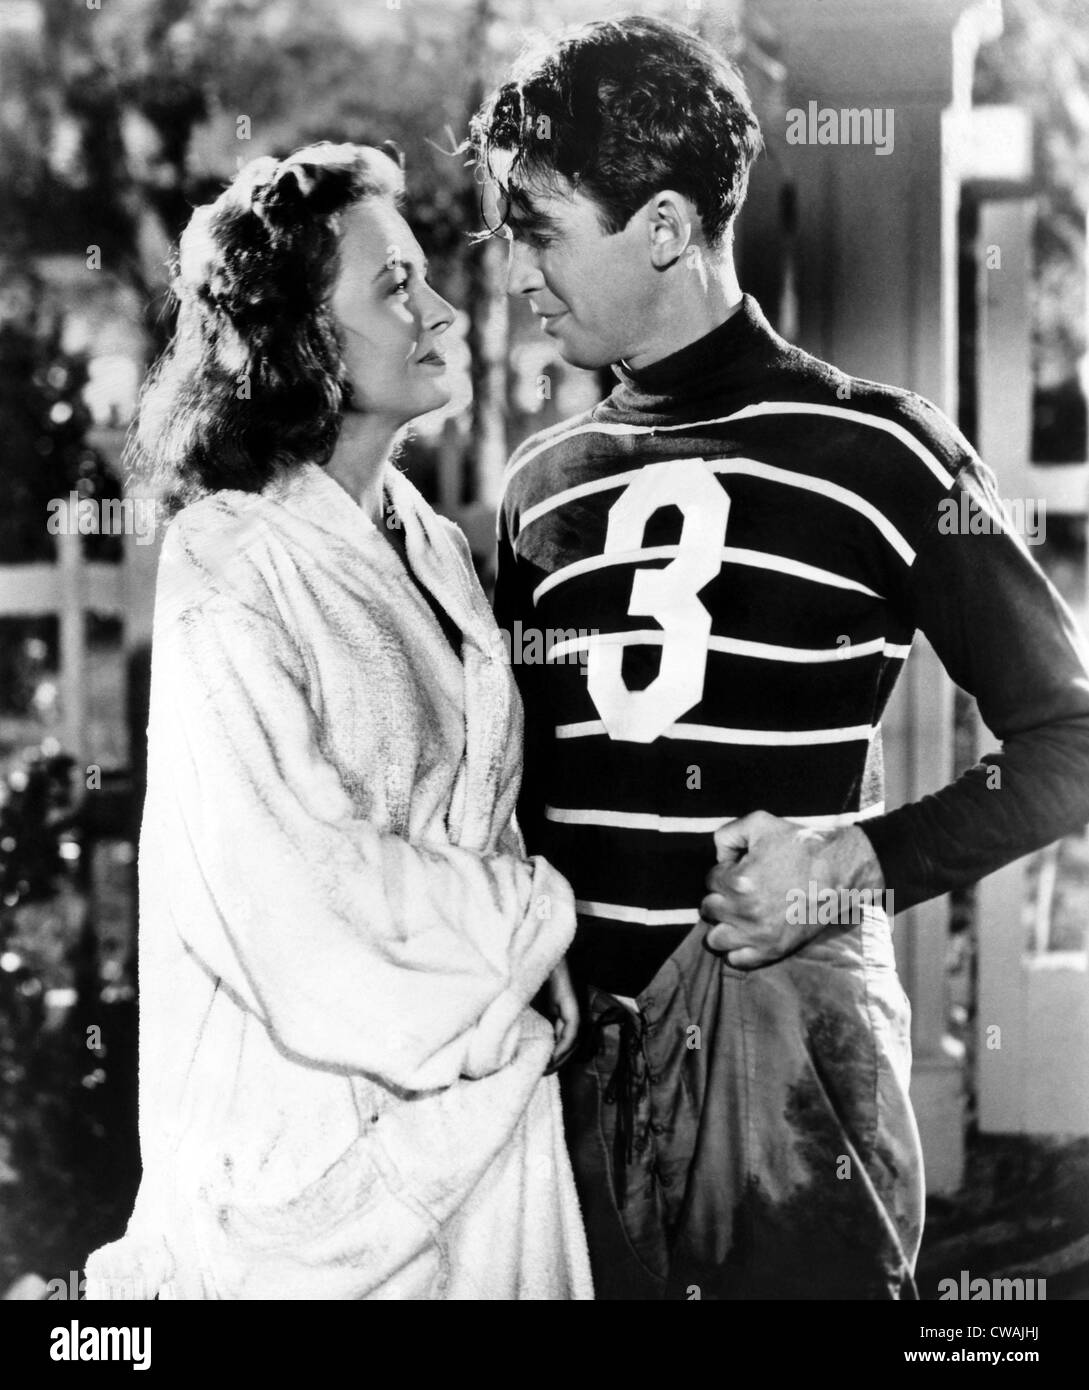 IT'S A WONDERFUL LIFE, Donna Reed, James Stewart, 1946. photo: CSU Archives / courtesy Everett Collection Stock Photo